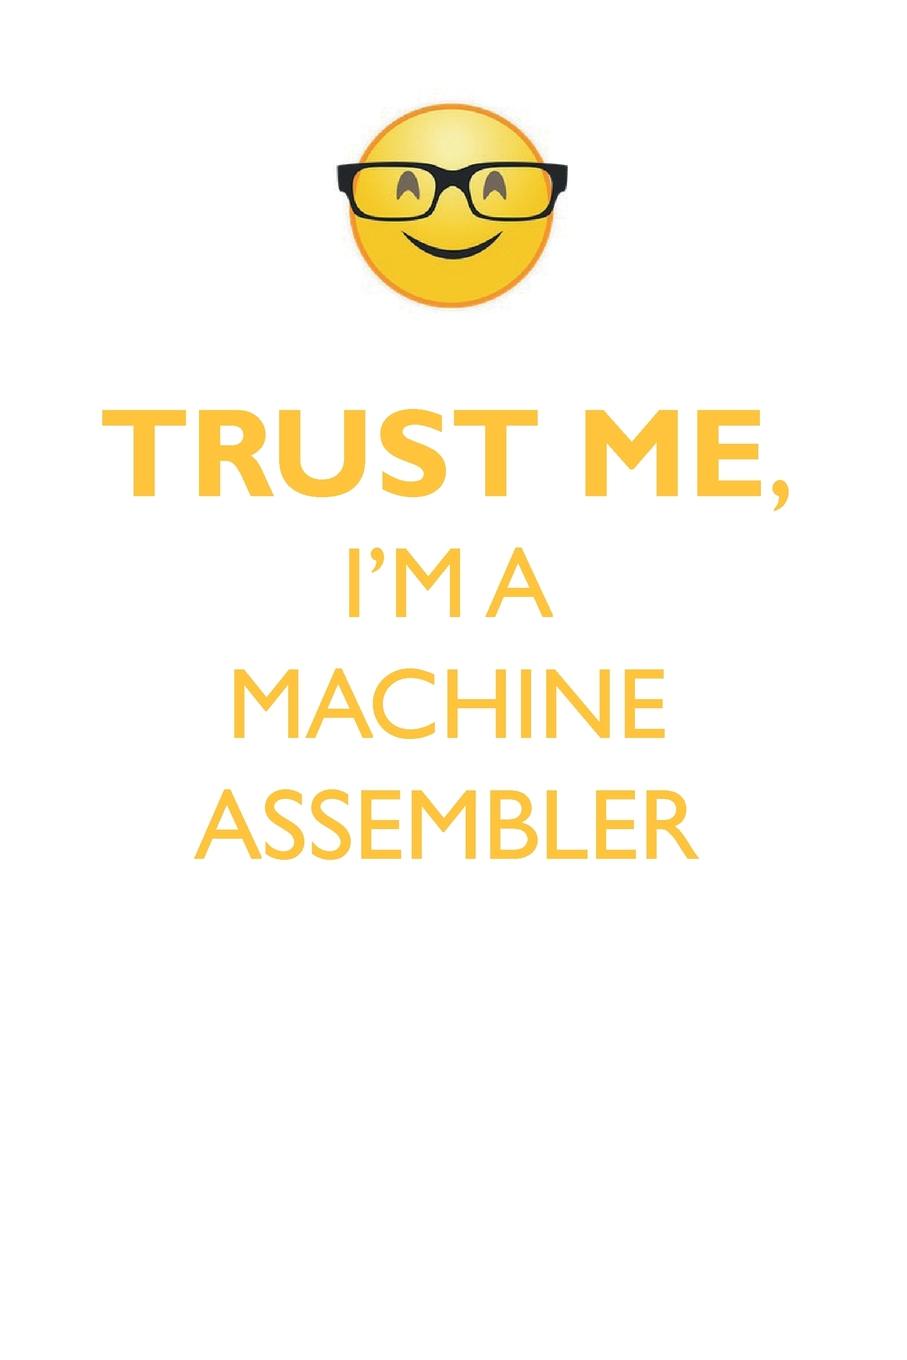 TRUST ME, I`M A MACHINE ASSEMBLER AFFIRMATIONS WORKBOOK Positive Affirmations Workbook. Includes. Mentoring Questions, Guidance, Supporting You.